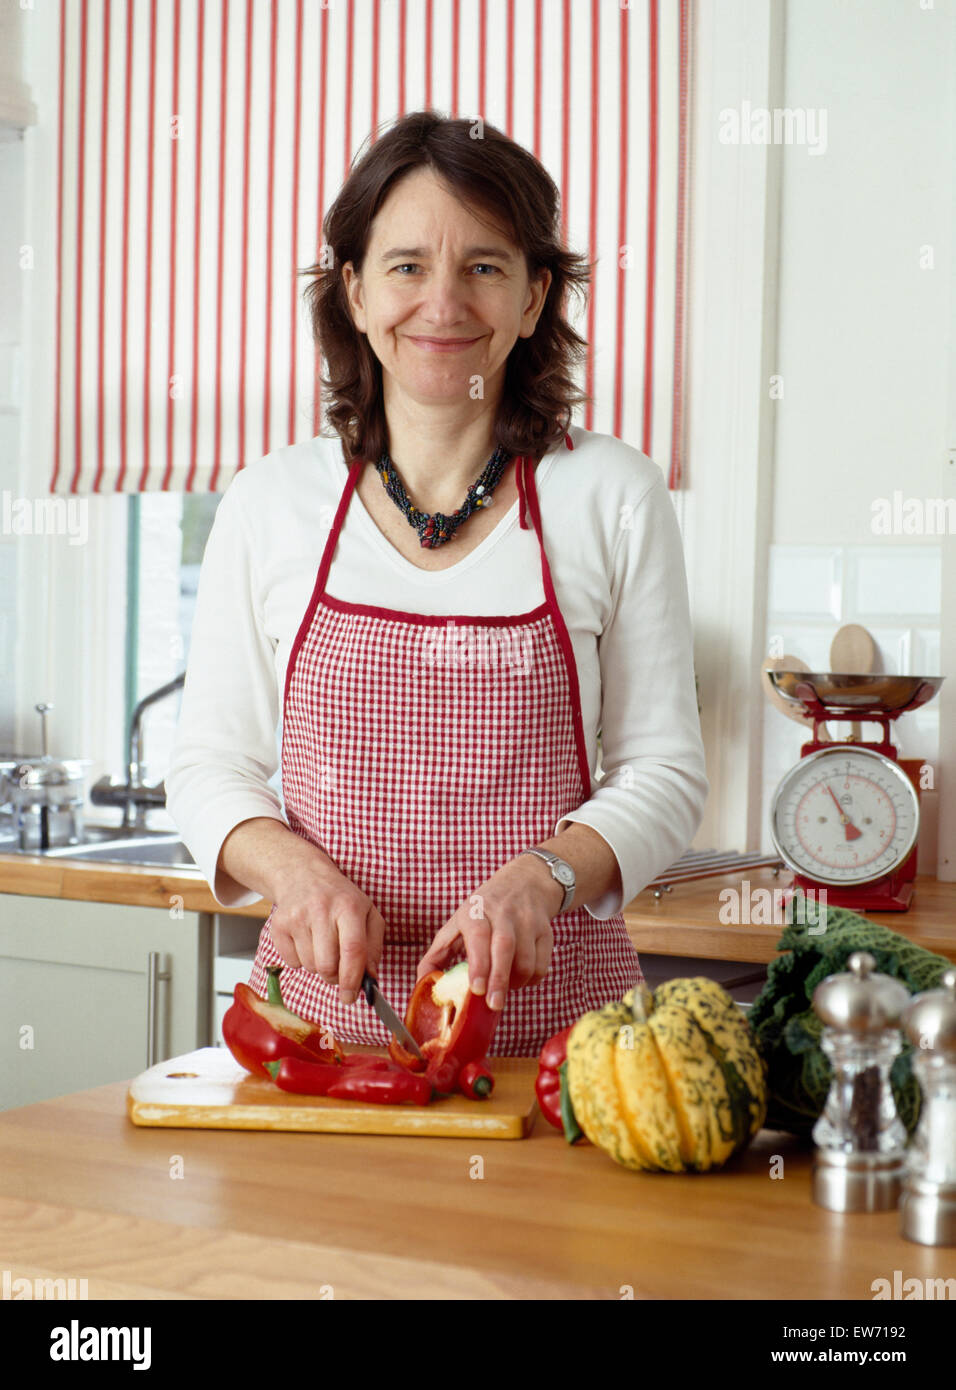 Portrait of smiling woman chopping up red peppers         FOR EDITORIAL USE ONLY Stock Photo